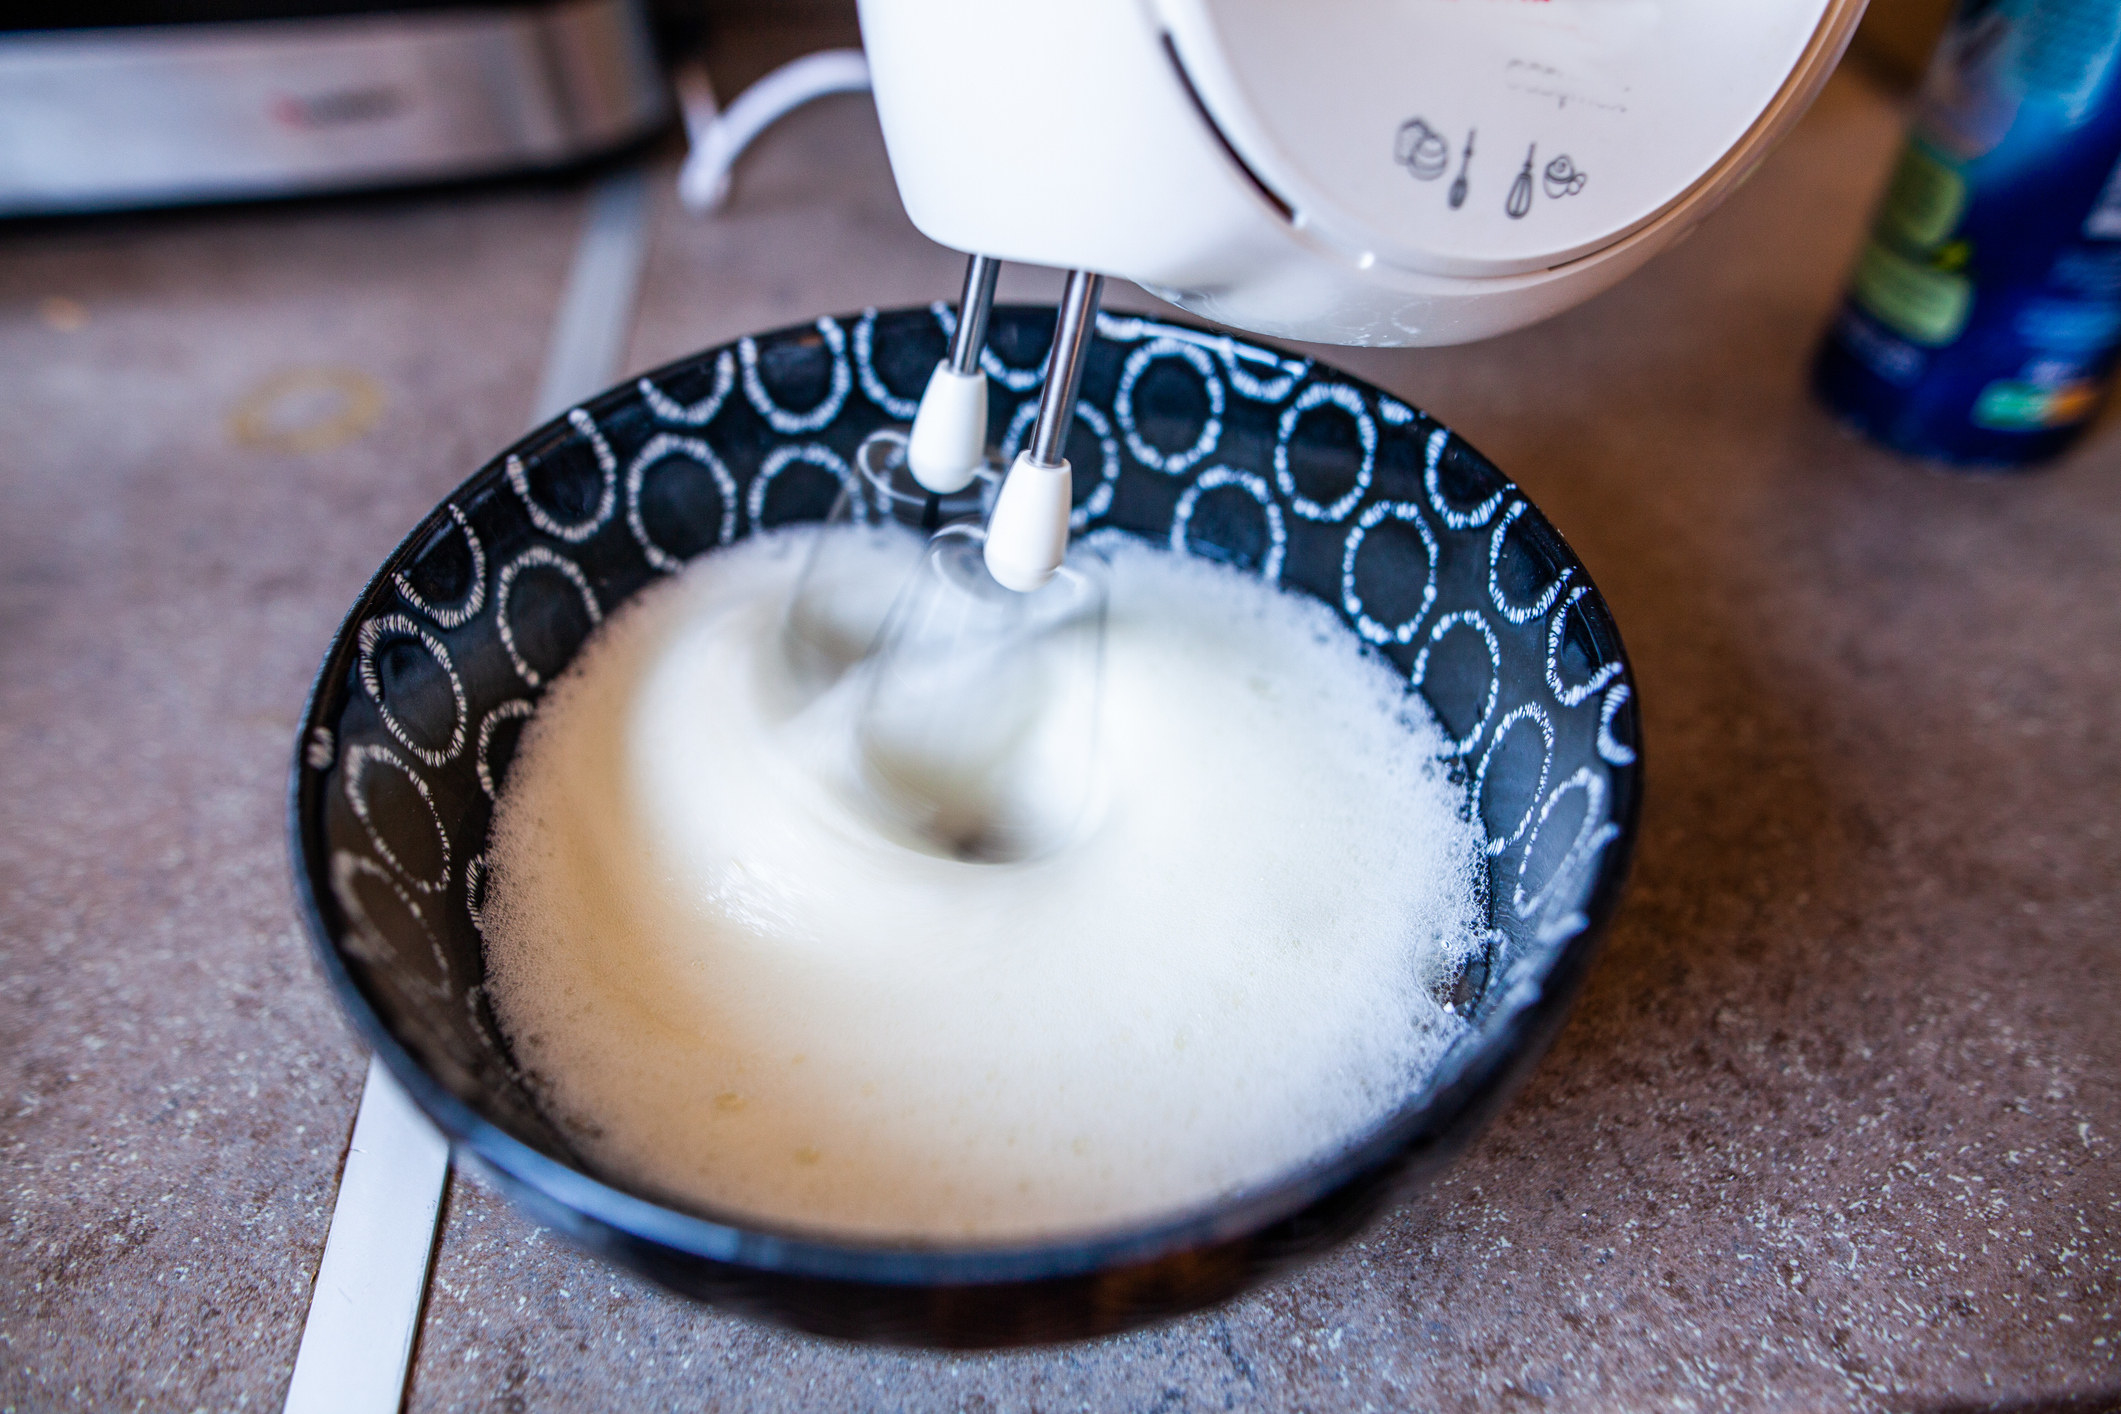 Beating egg whites in a bowl.